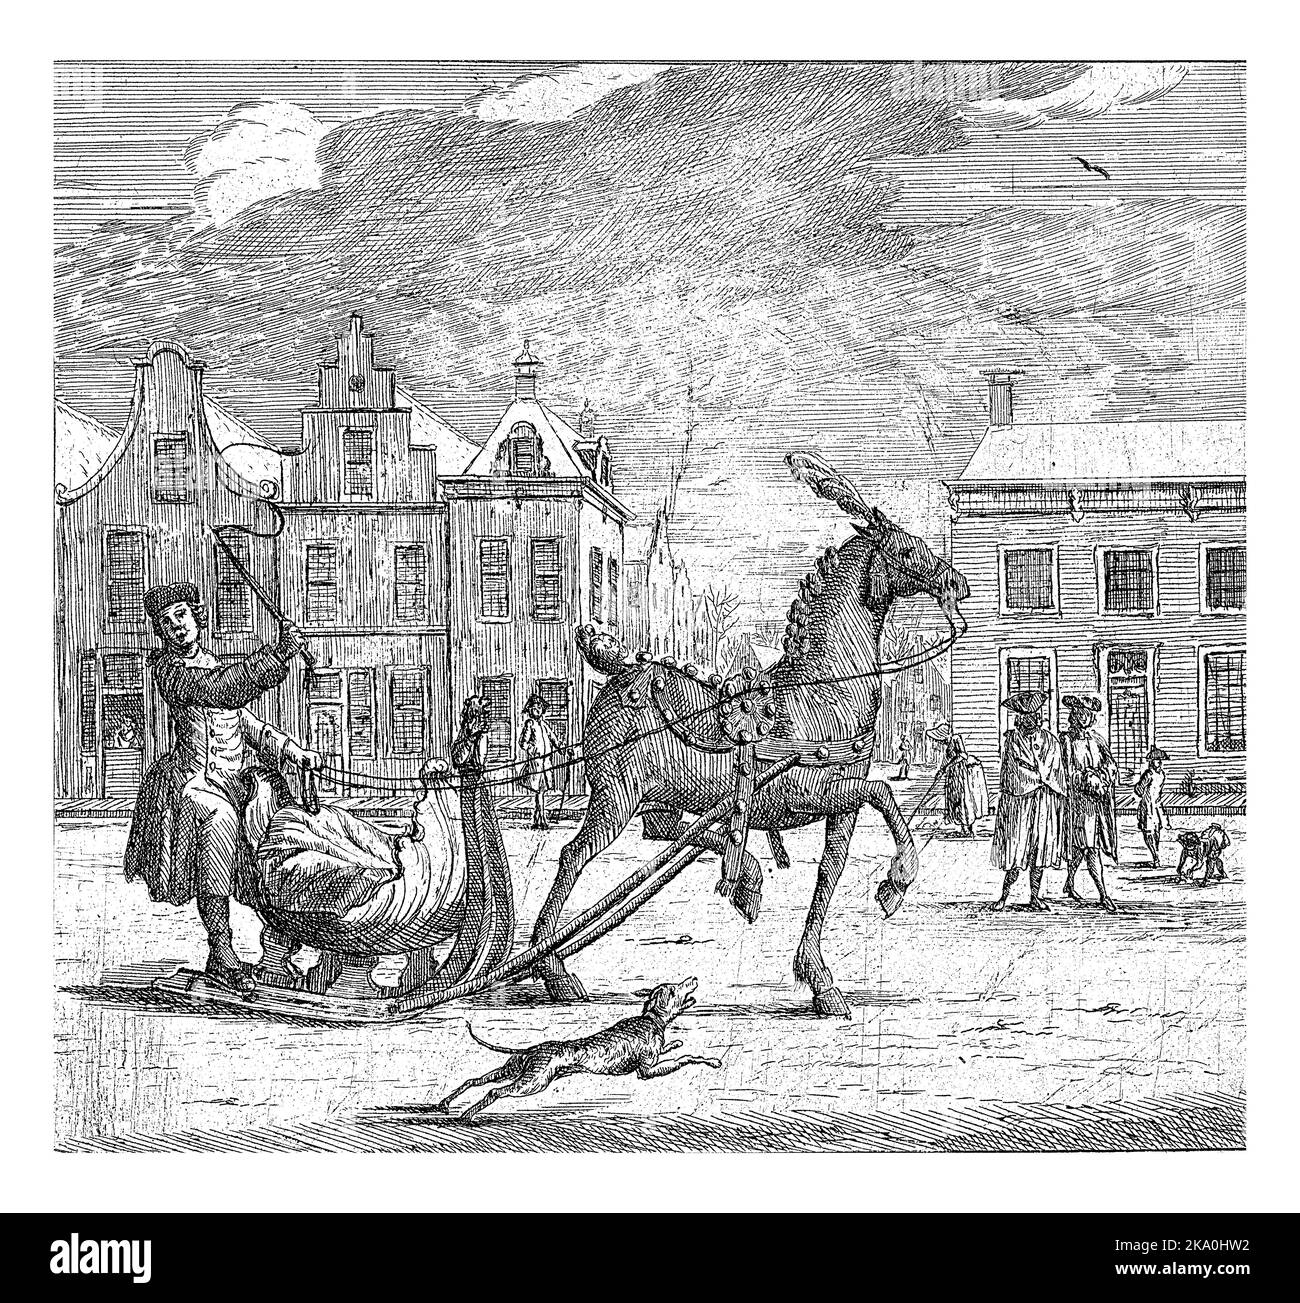 Cityscape with horse-drawn sleigh. A man with a whip is standing on the sled. In the foreground a dog. Stock Photo